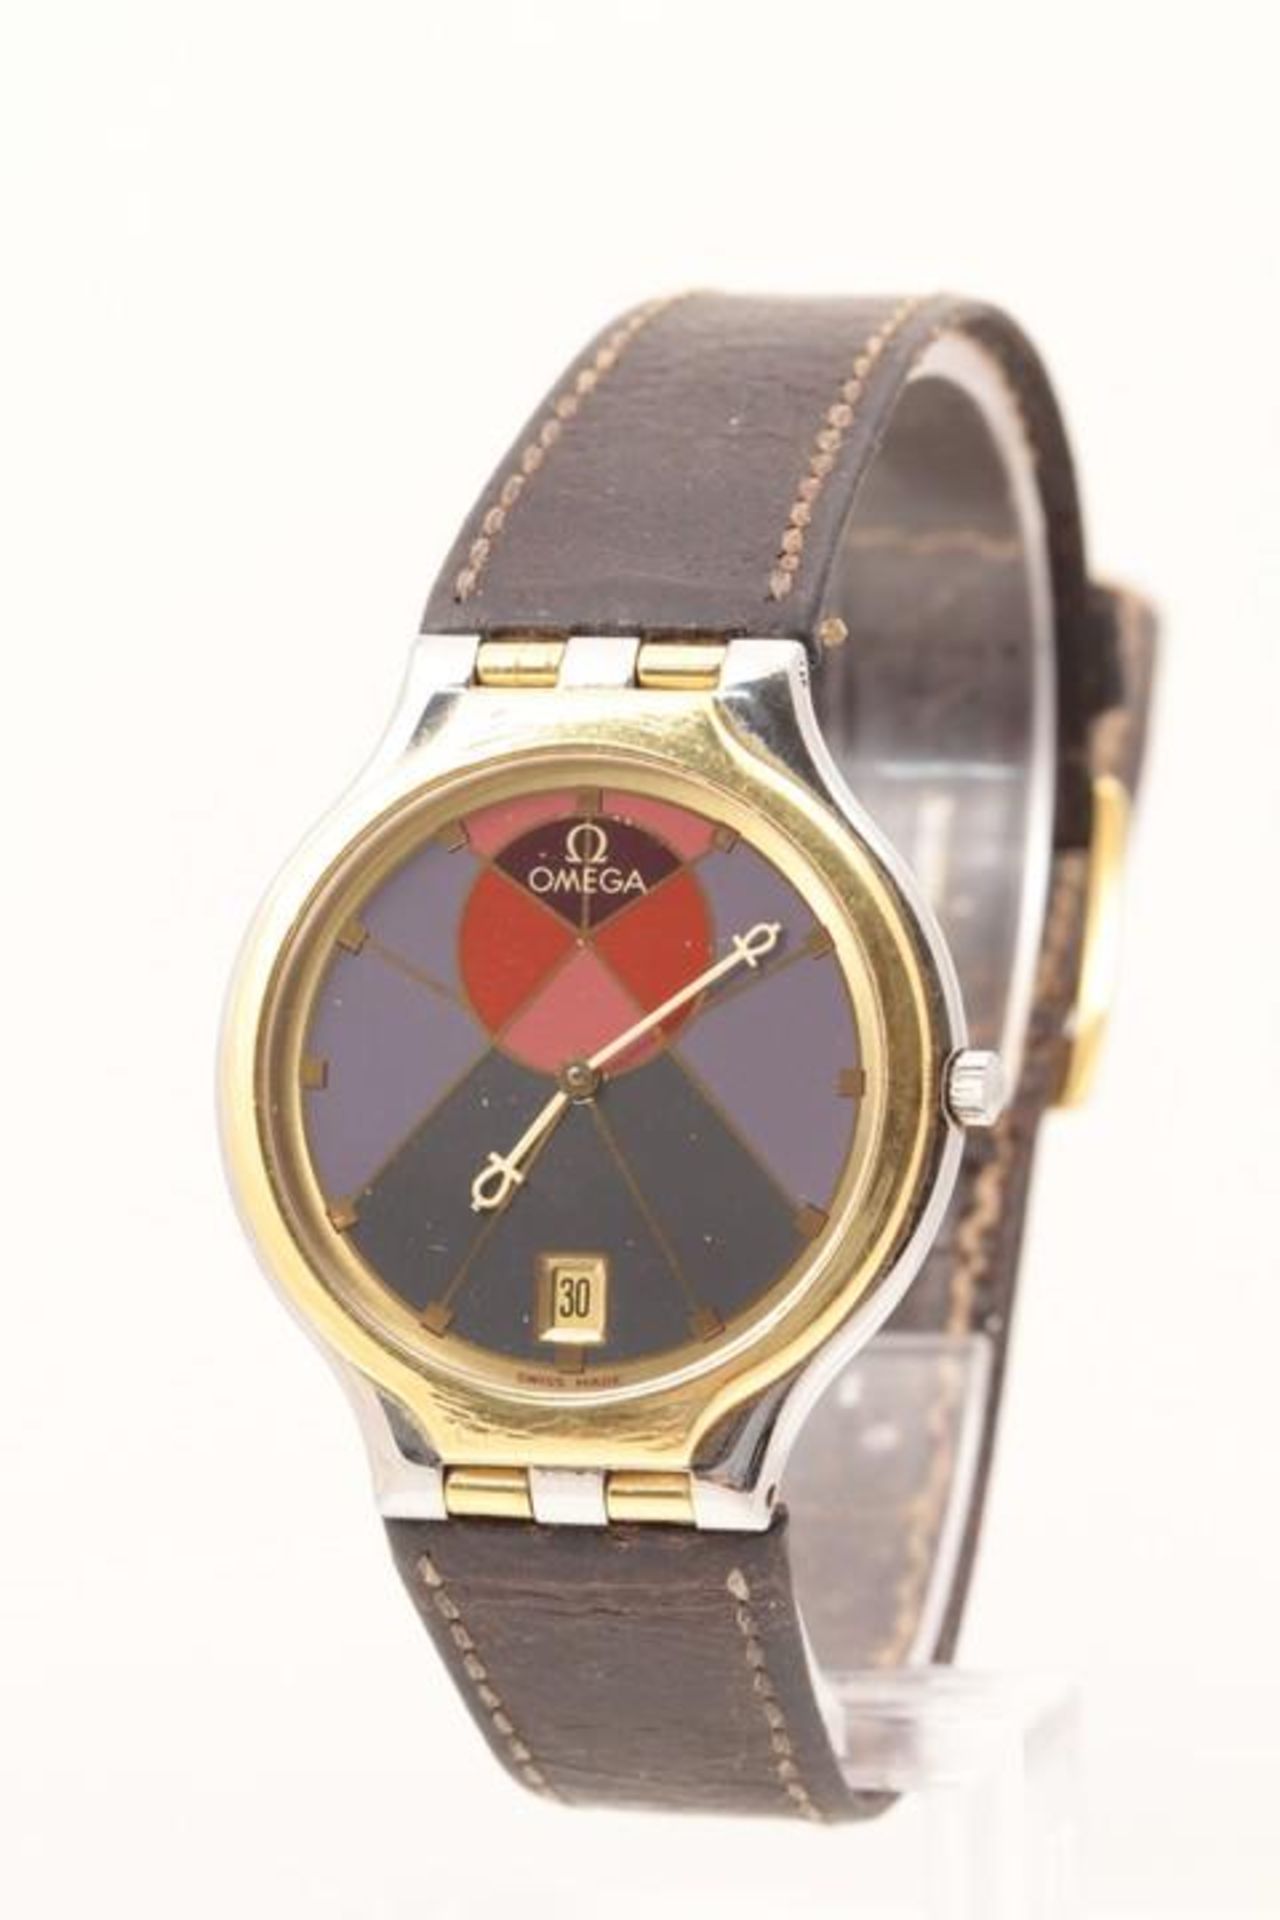 Omega De Ville Symbol Sun Stainless Steel, 18ct Gold Bezel Watch and Brown Leather Strap. Watch